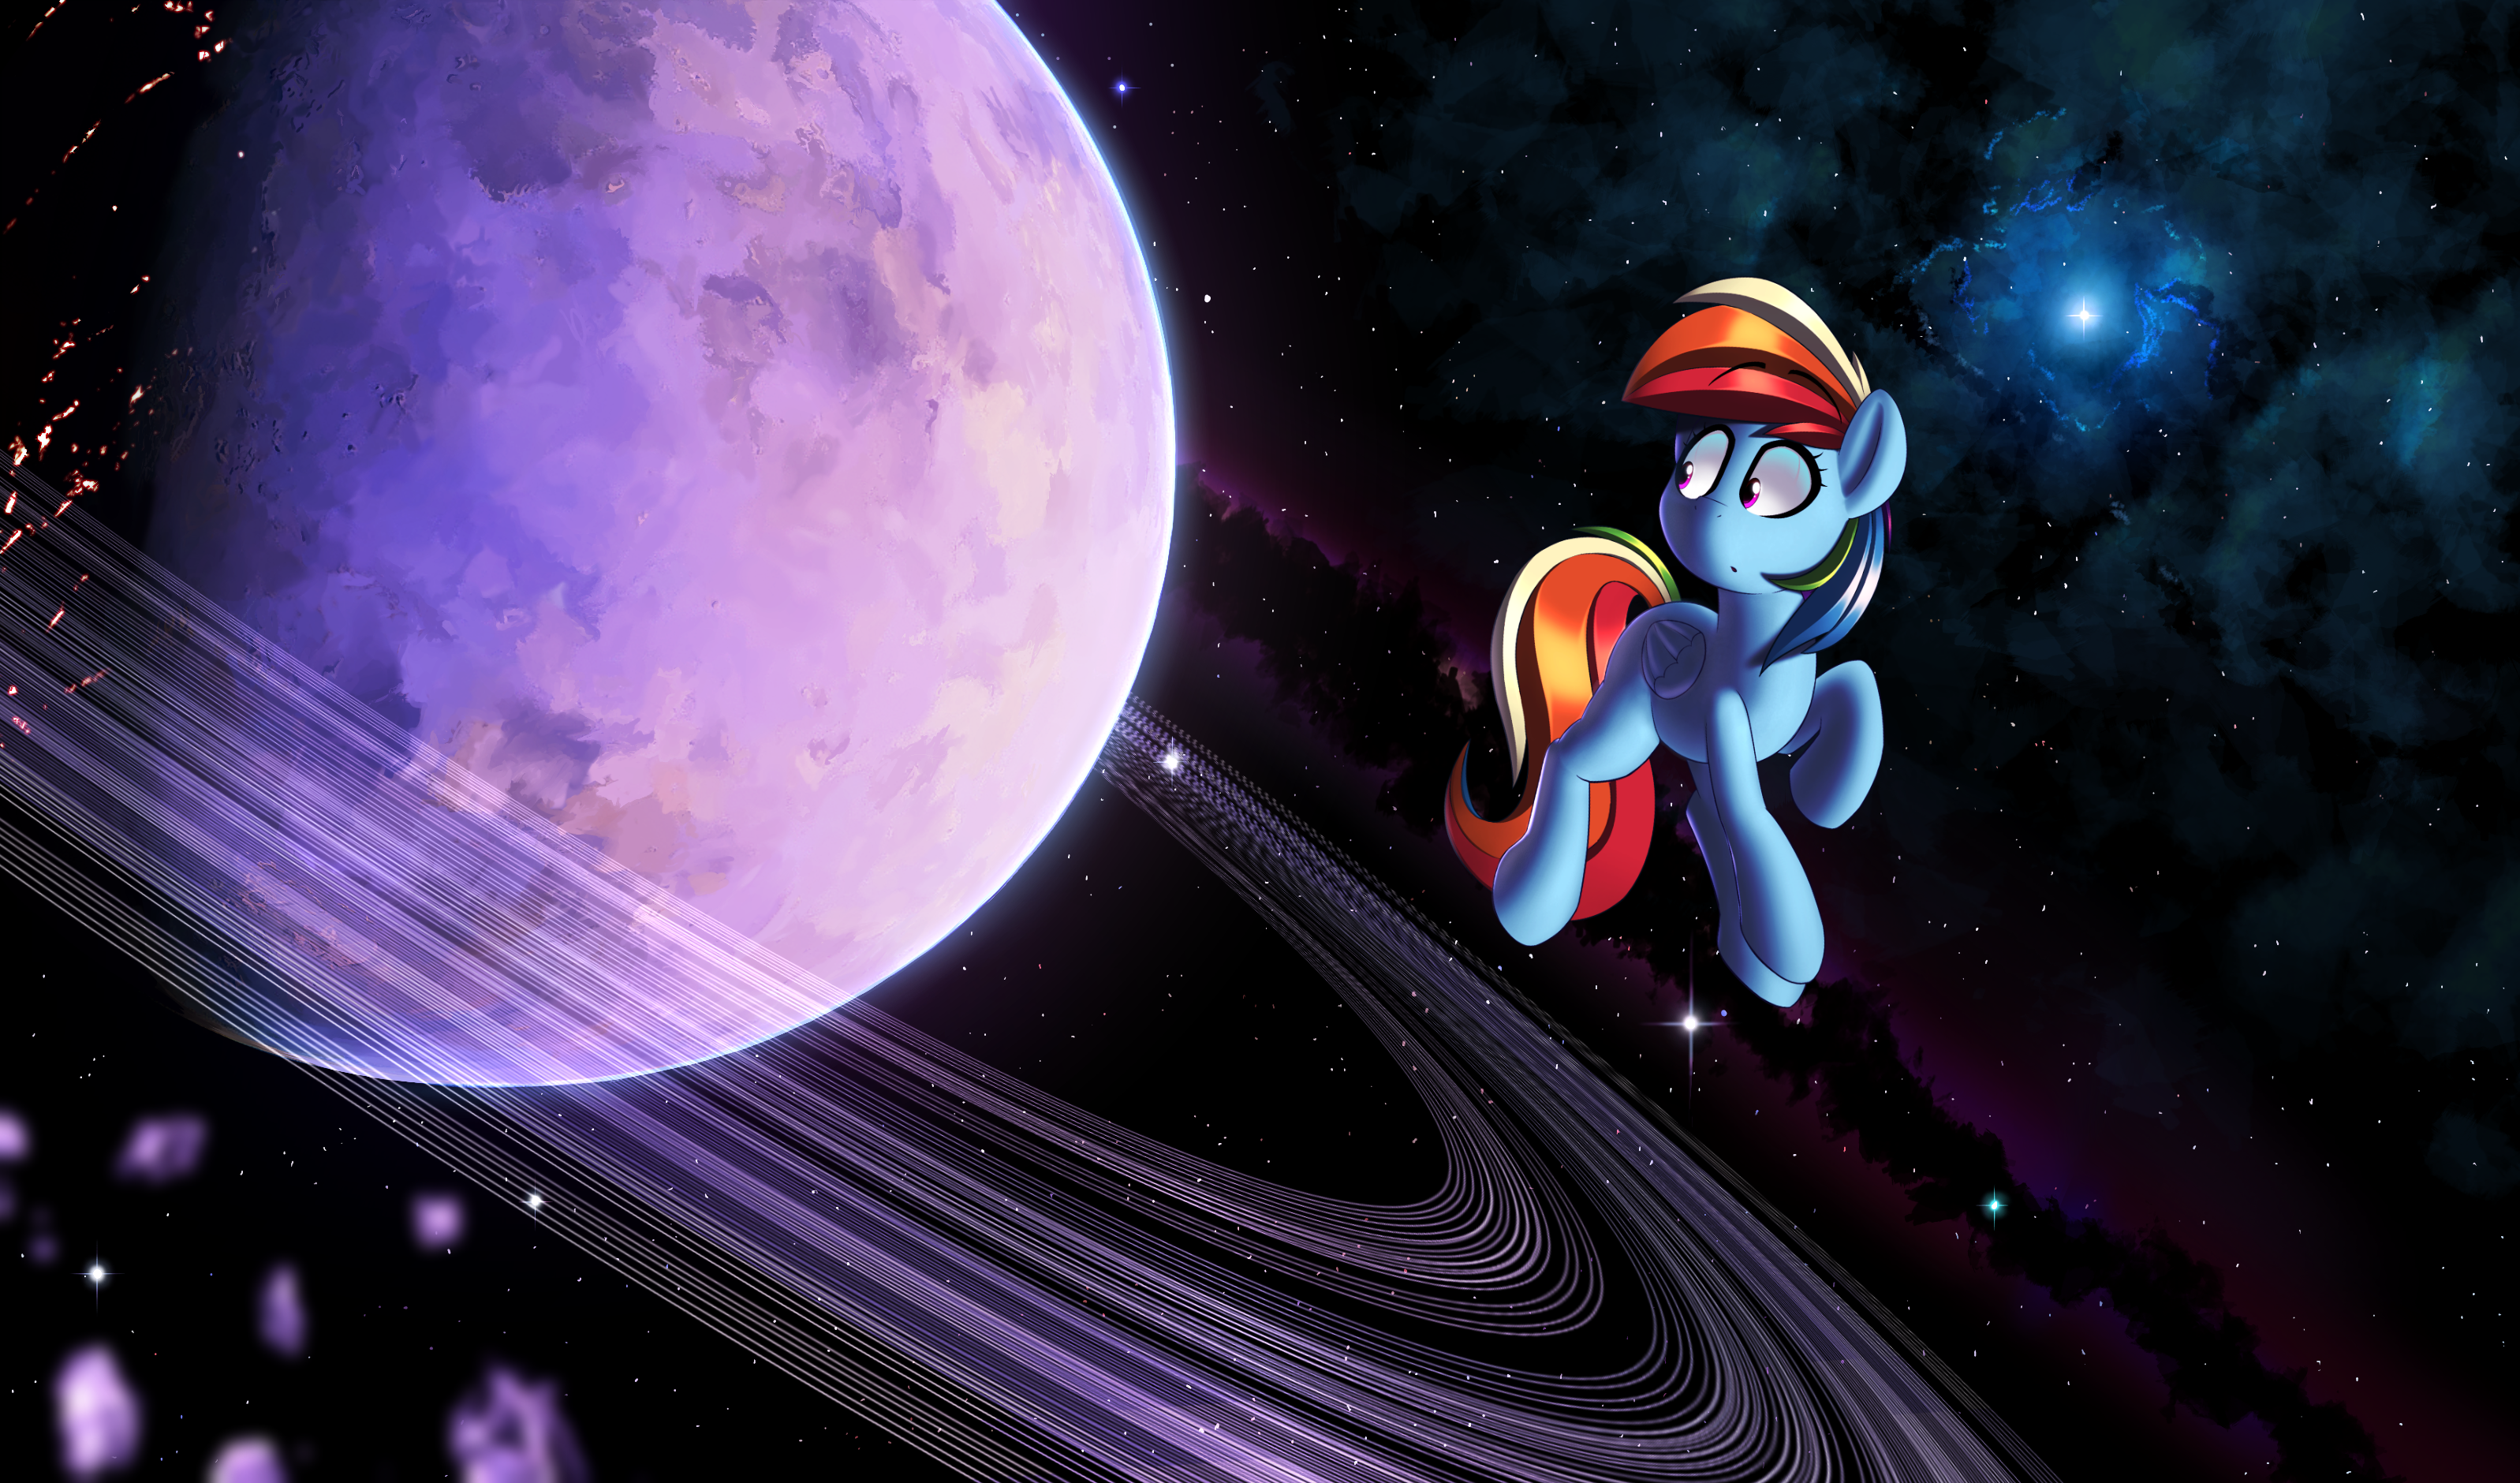 space___by_january3rd-db5mj74.png